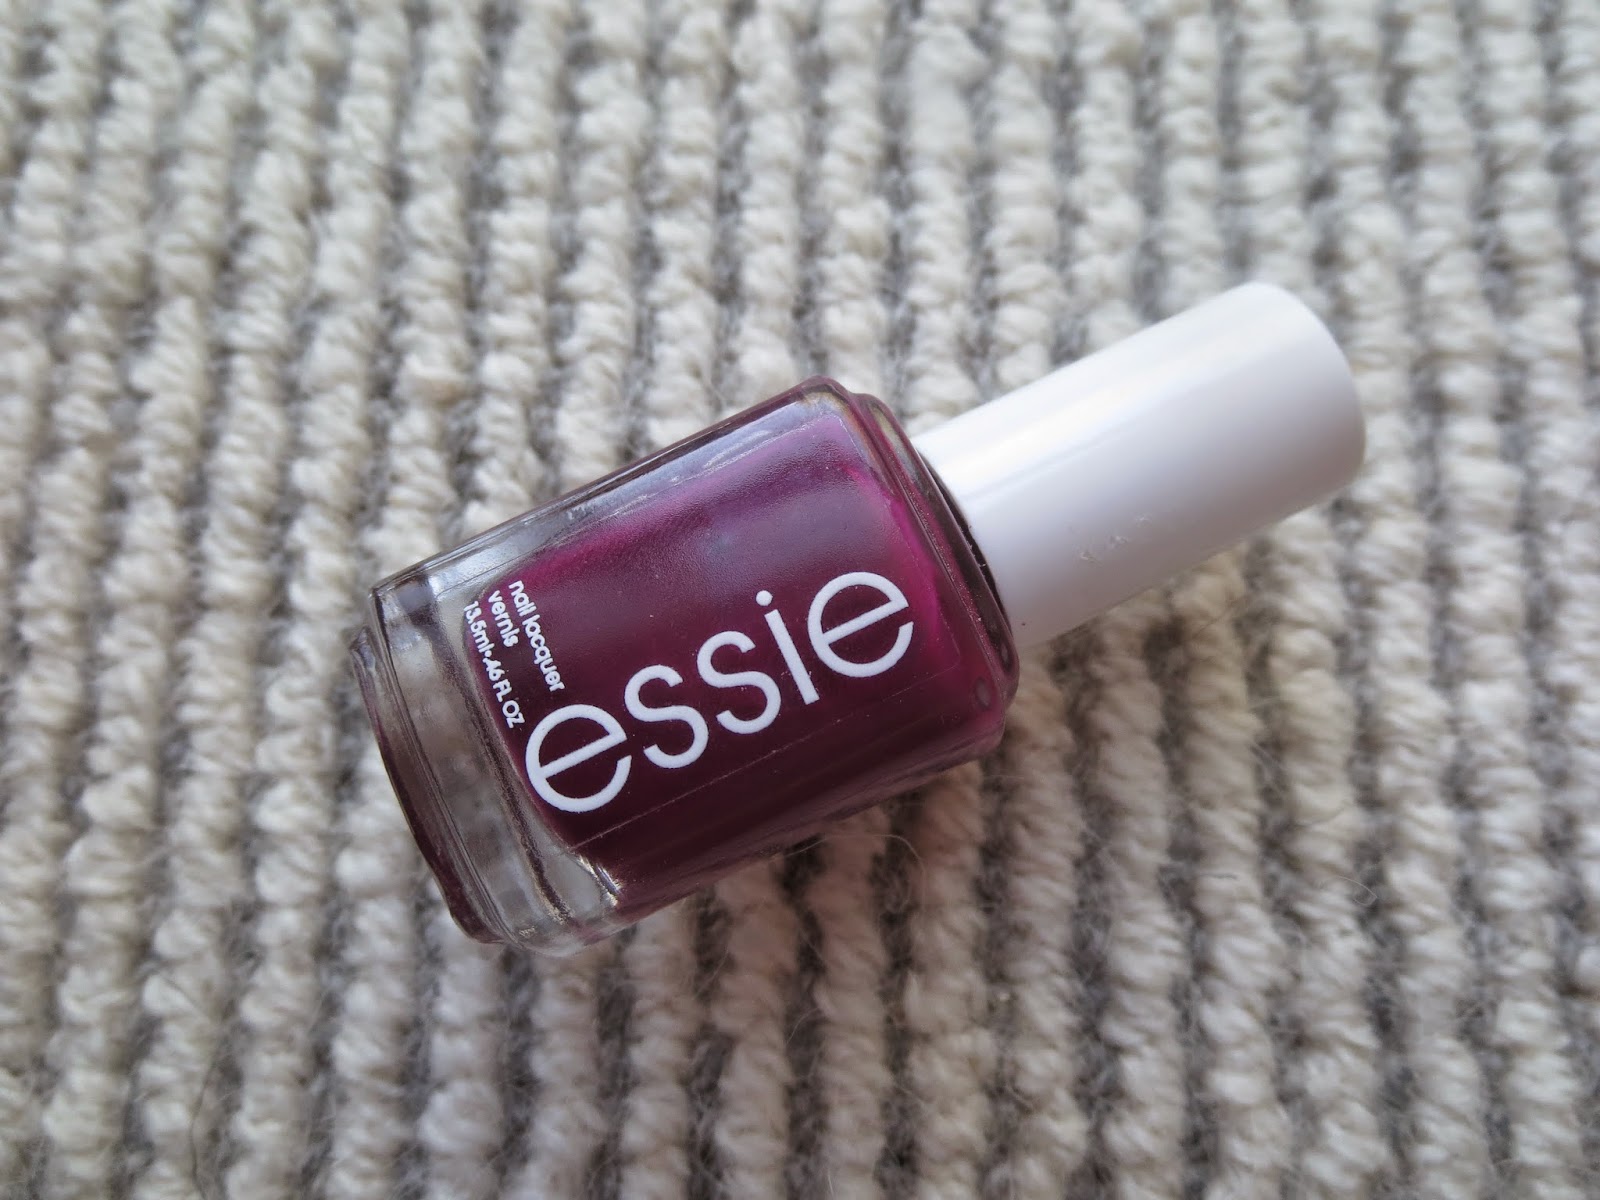 A picture of Essie's Bahama Mama